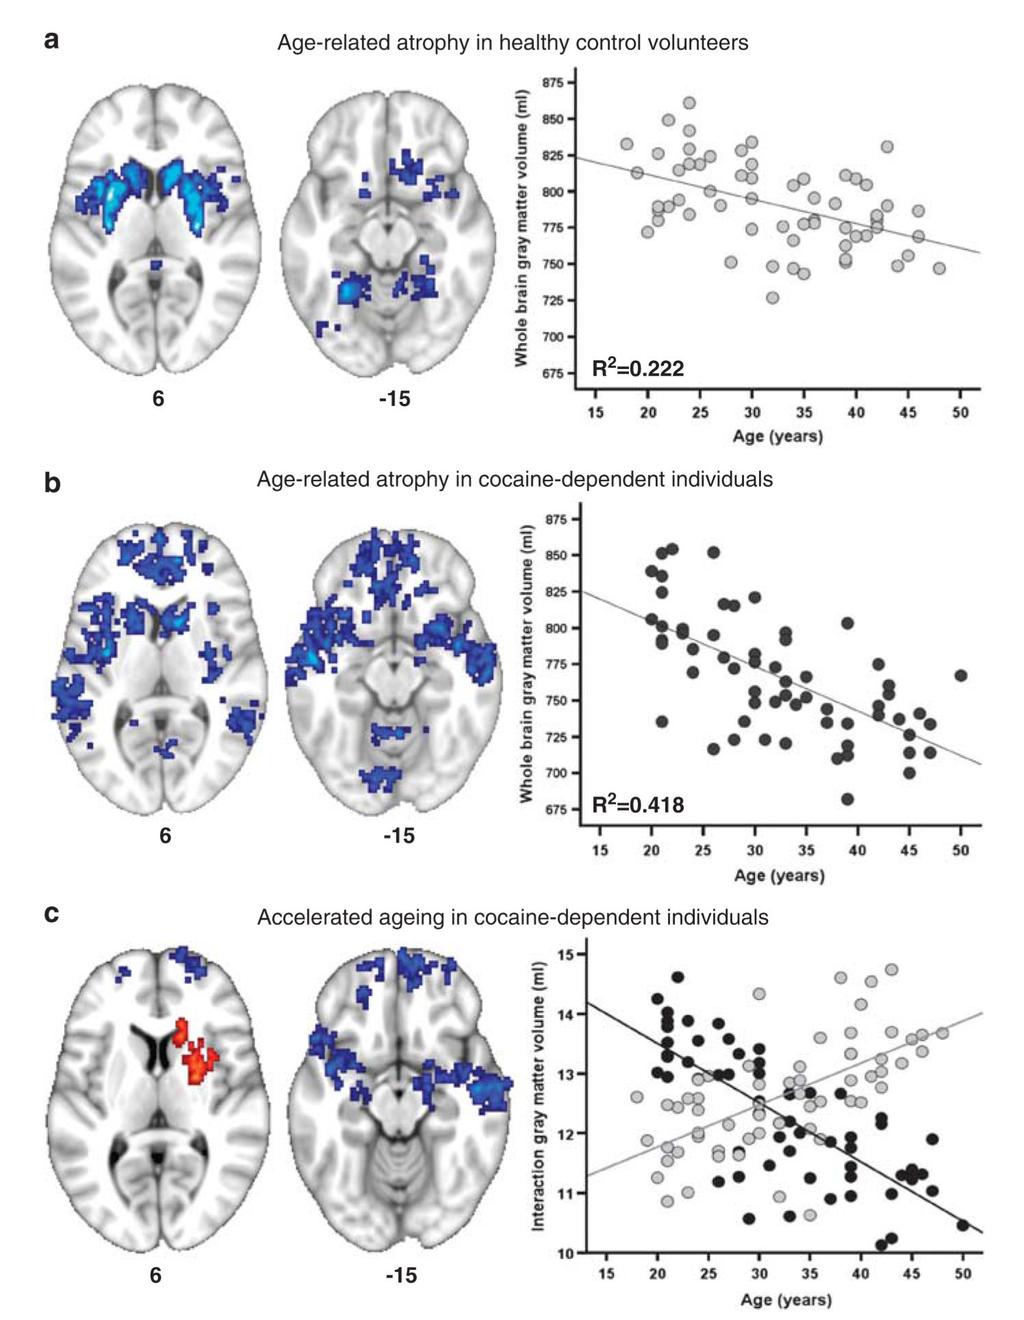 Ersche et al. Page 4 Figure 1. Age-related changes in gray matter volume in 60 healthy volunteers and 60 cocainedependent individuals.